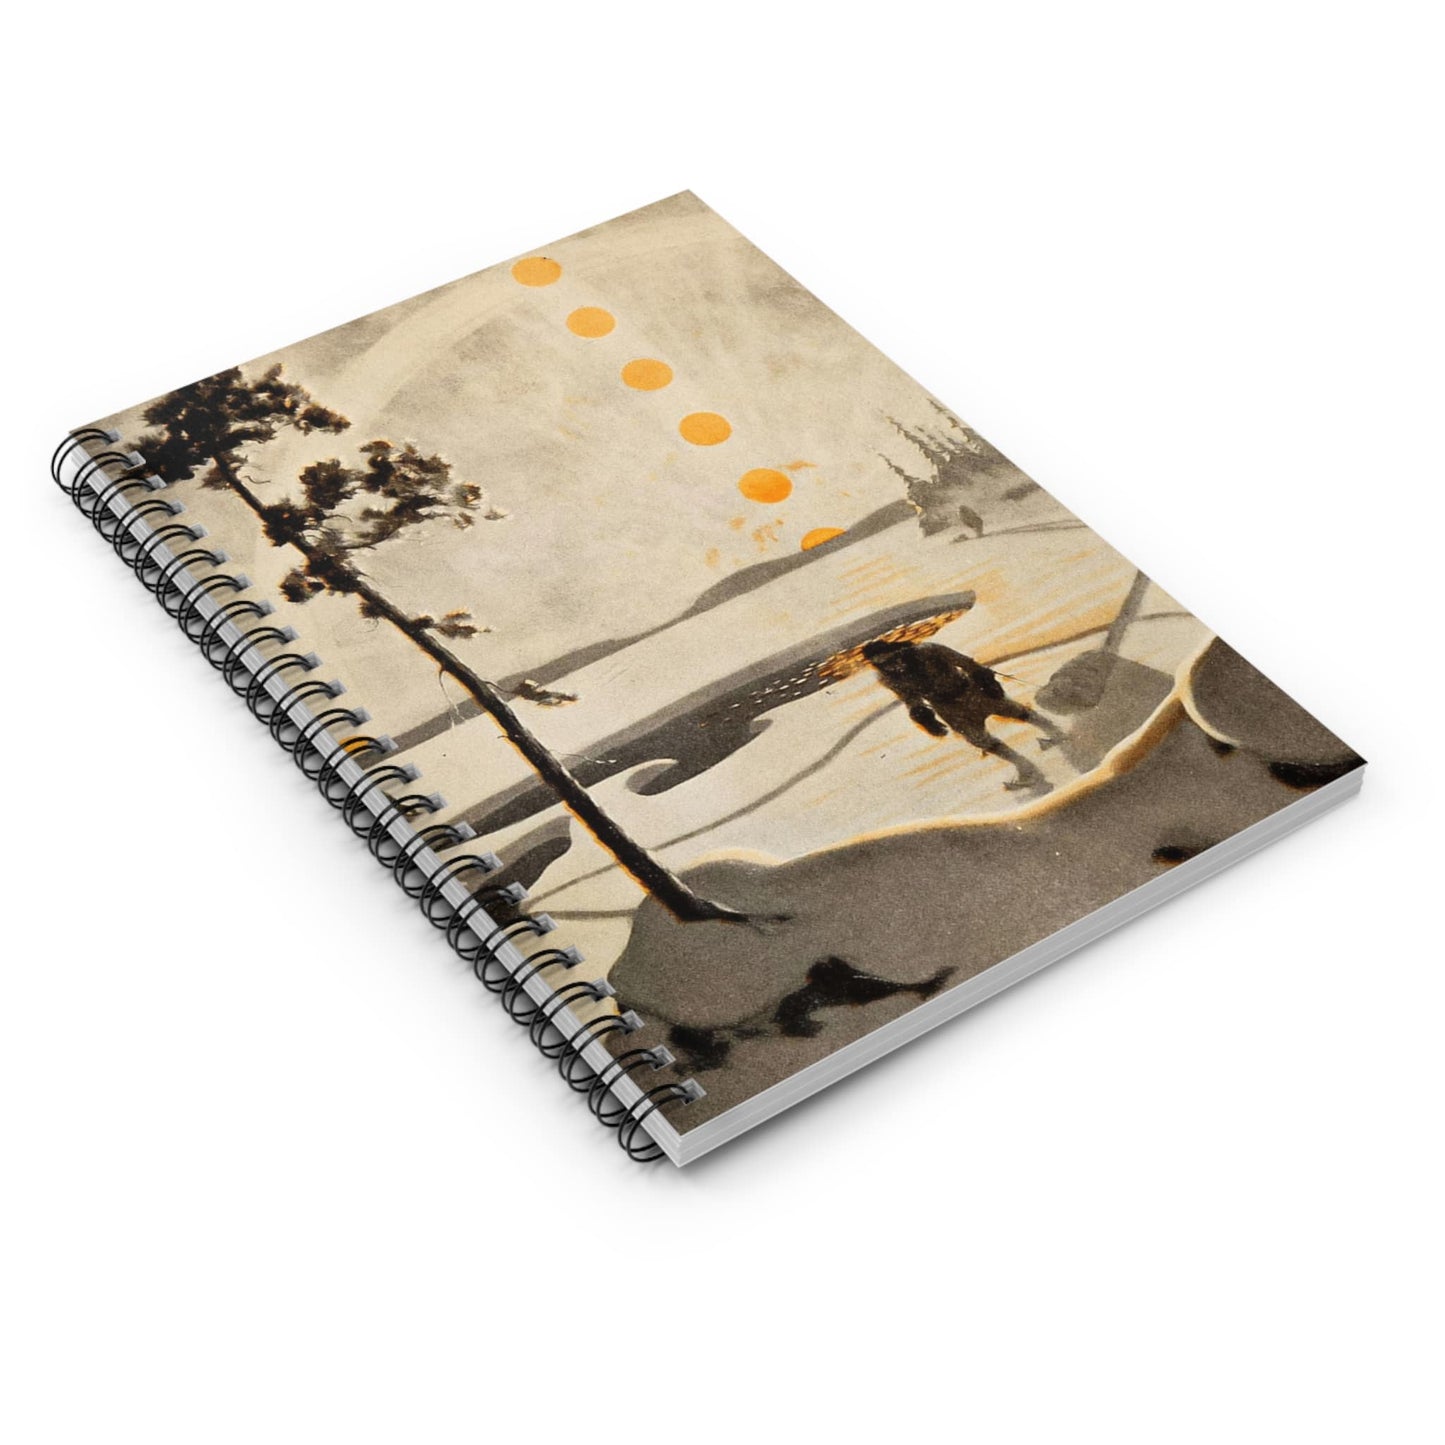 Winter Journey Spiral Notebook Laying Flat on White Surface